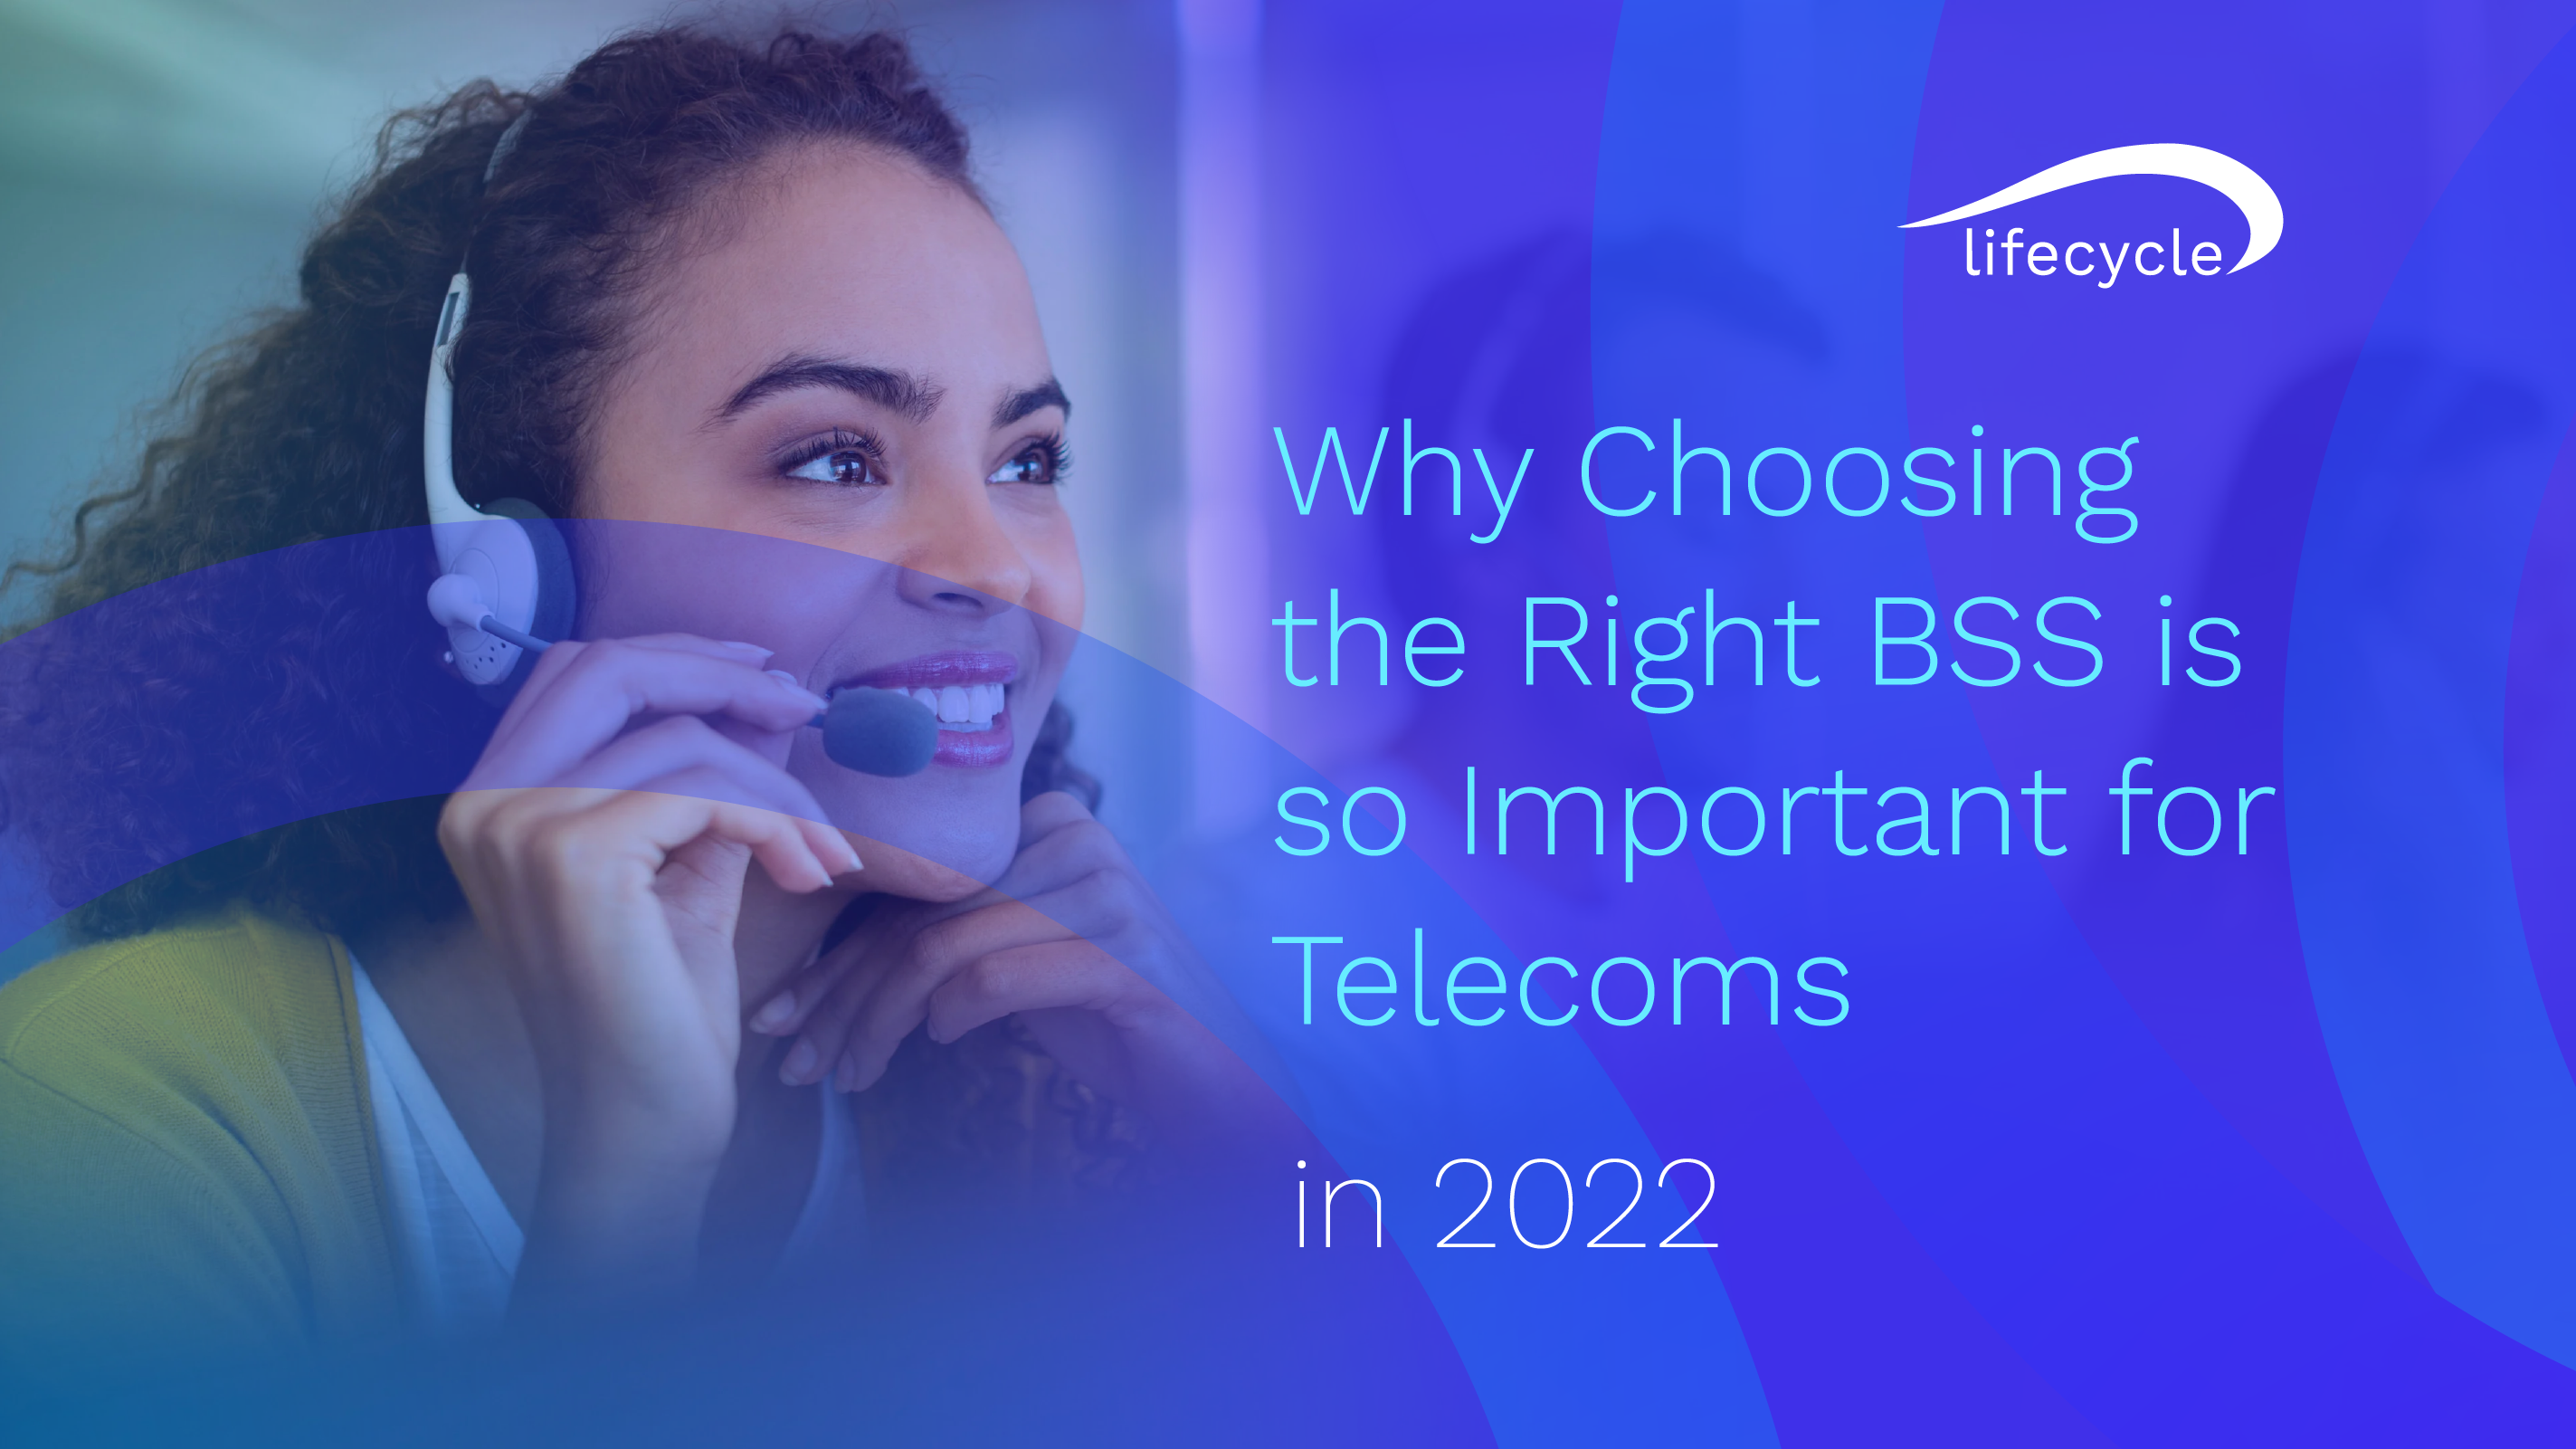 Why Choosing the Right BSS is so Important for Telecoms 2022